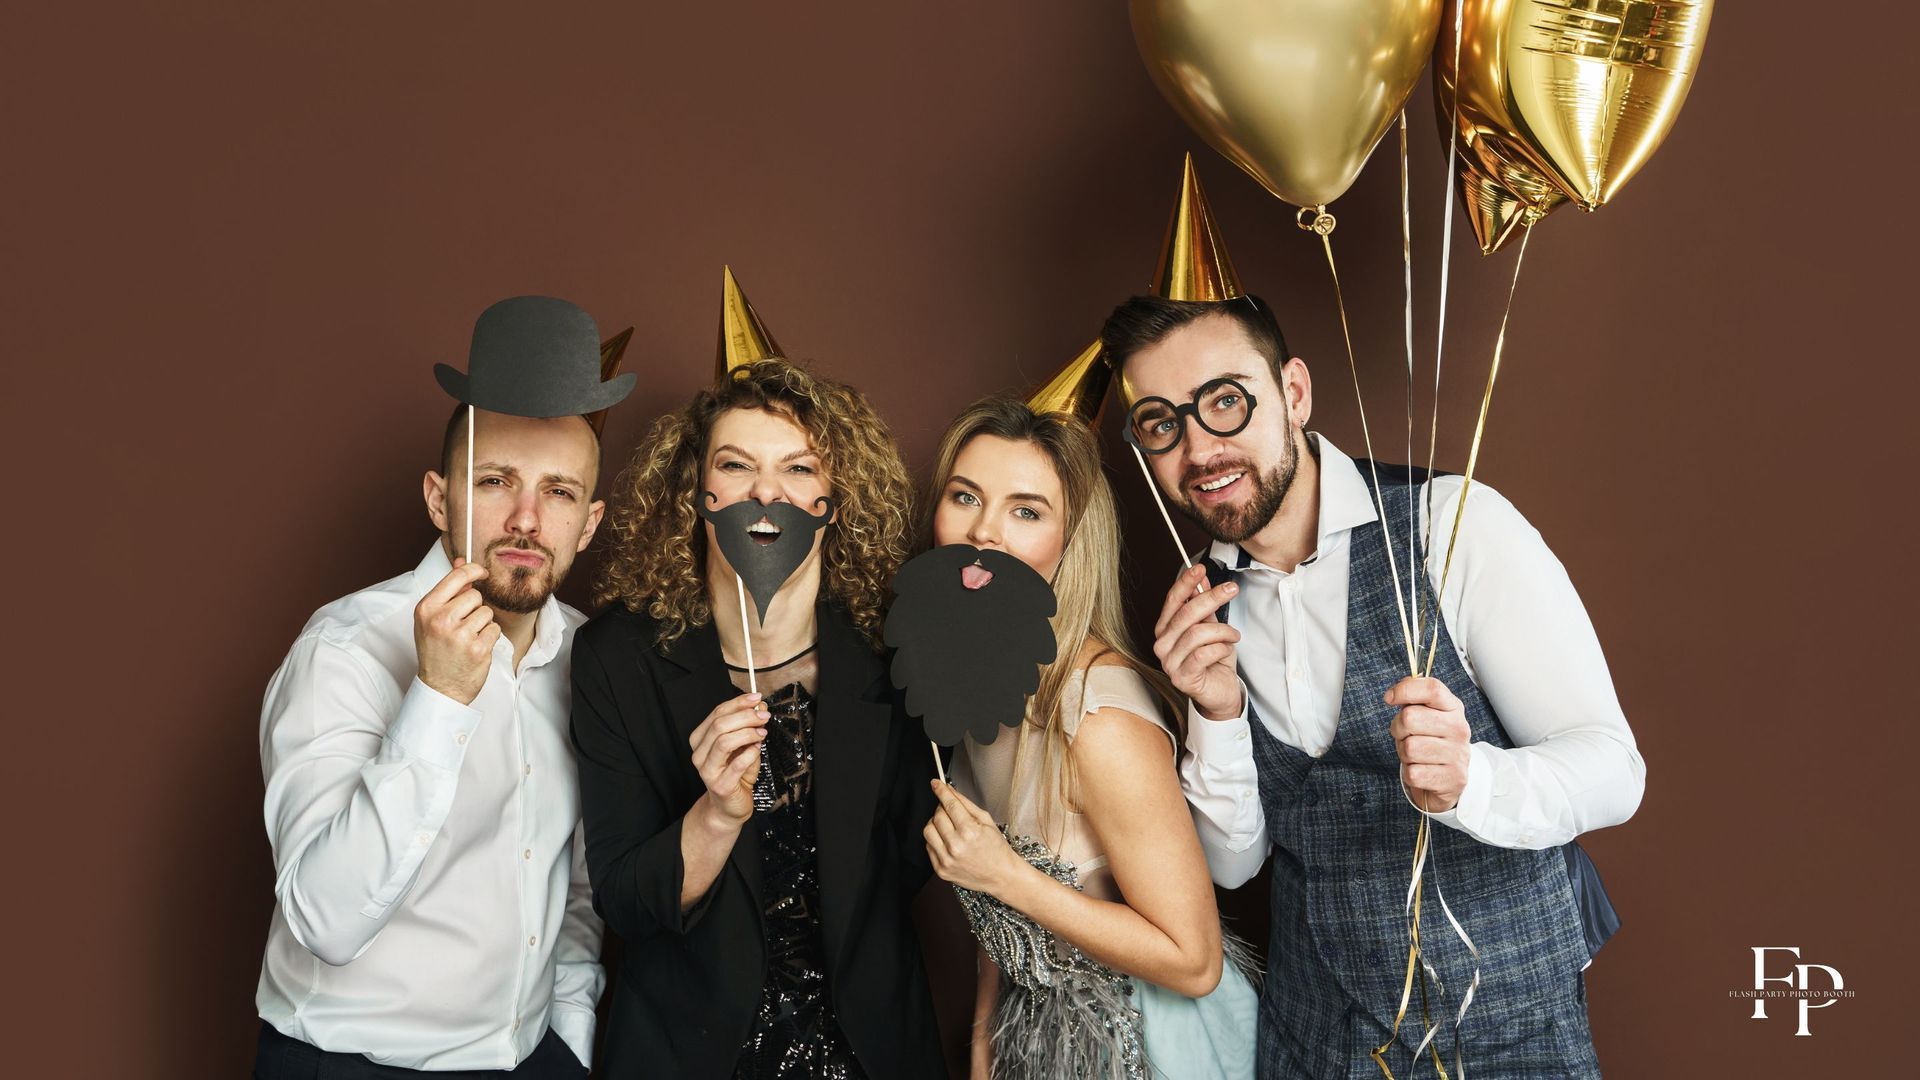 A group of friends posing at a photo booth rental for a corporate event in Manor, holding up silly props and making funny poses